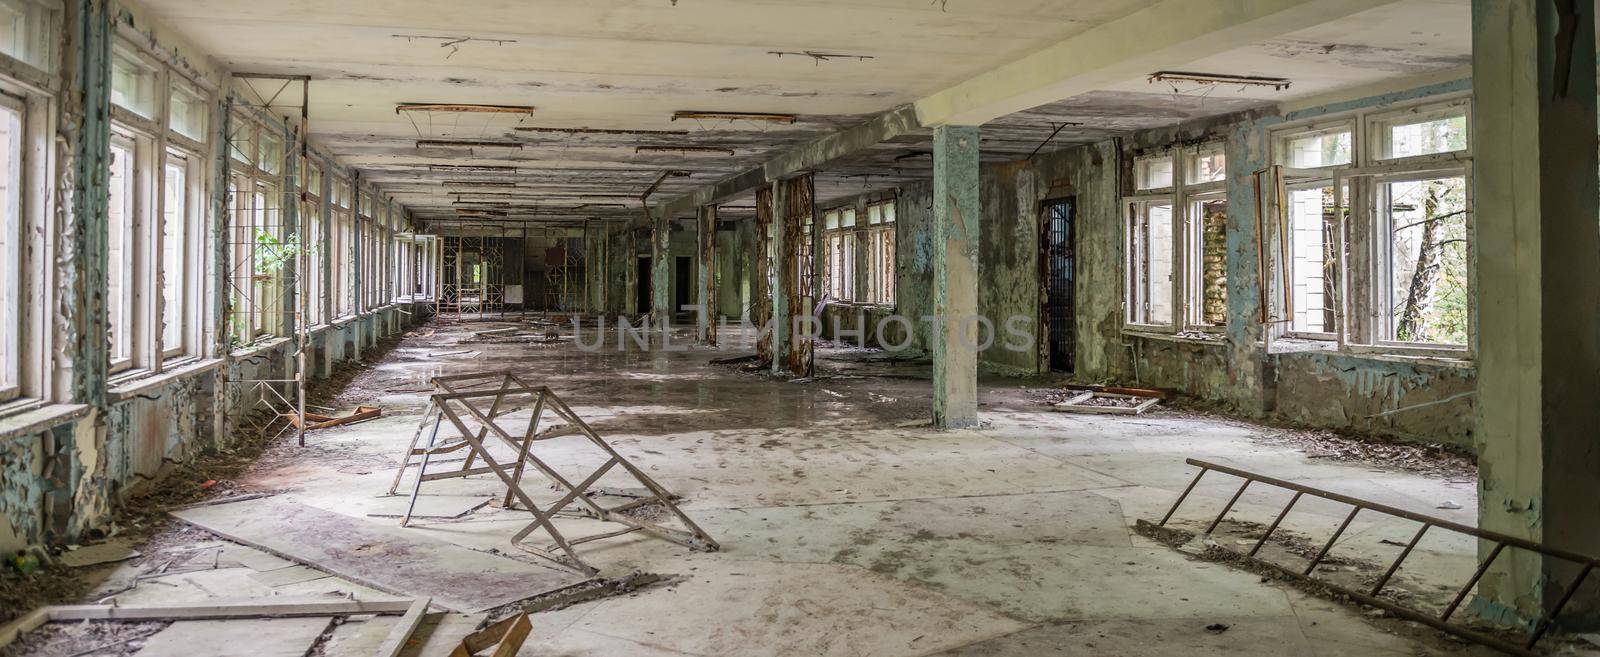 ruined school hall with debris and remains in Pripyat by tan4ikk1